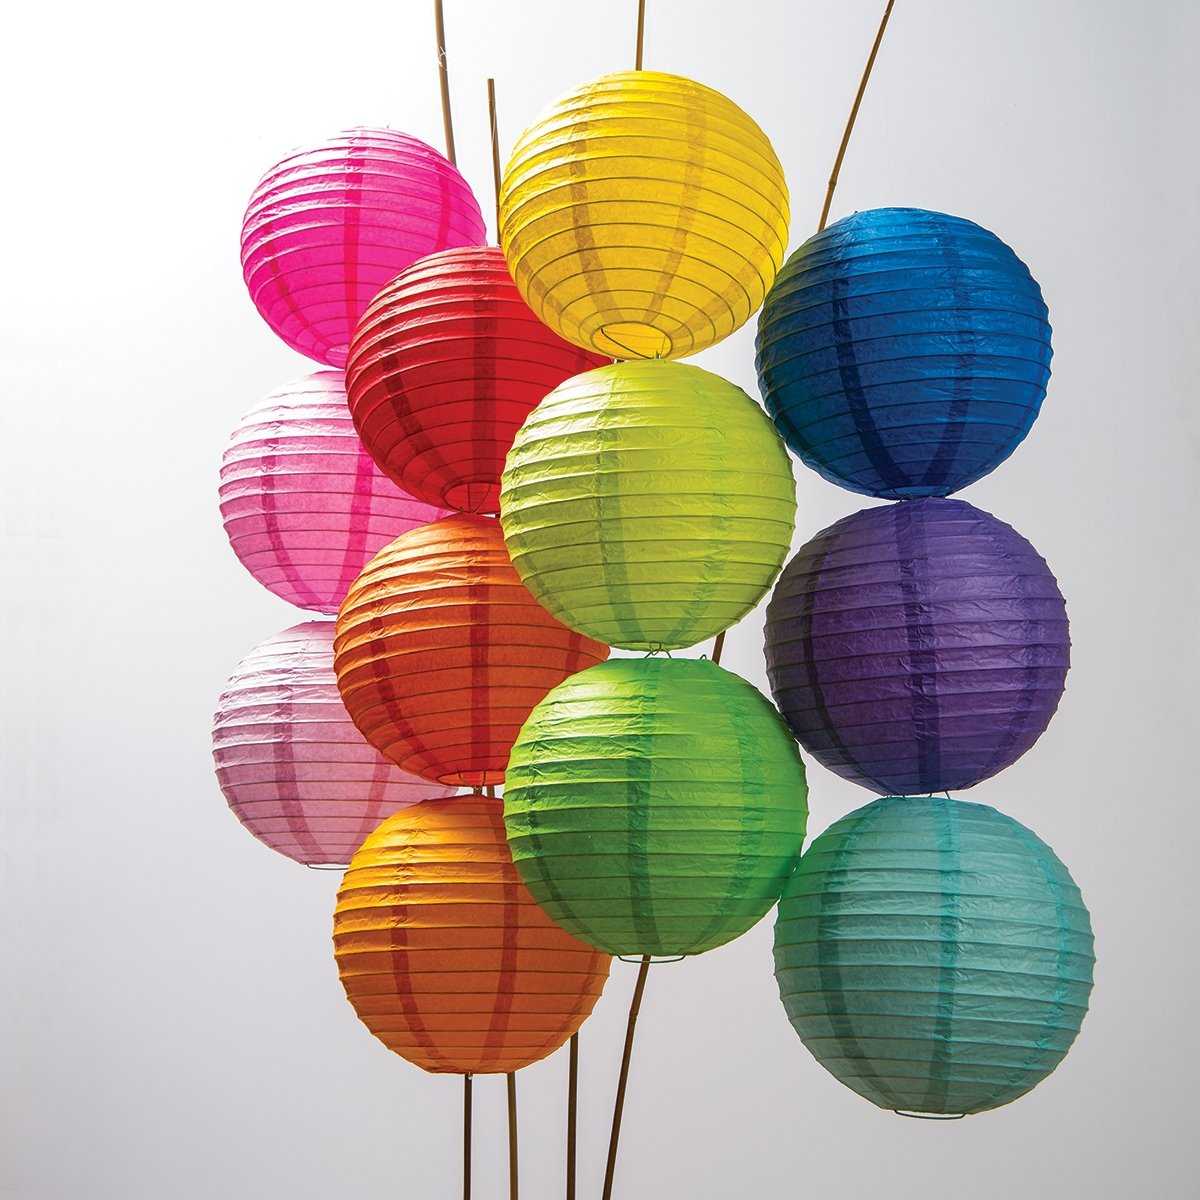 12-Pack of 10 Inch Multicolor No Frills Paper Lanterns - PaperLanternStore.com - Paper Lanterns, Decor, Party Lights &amp; More